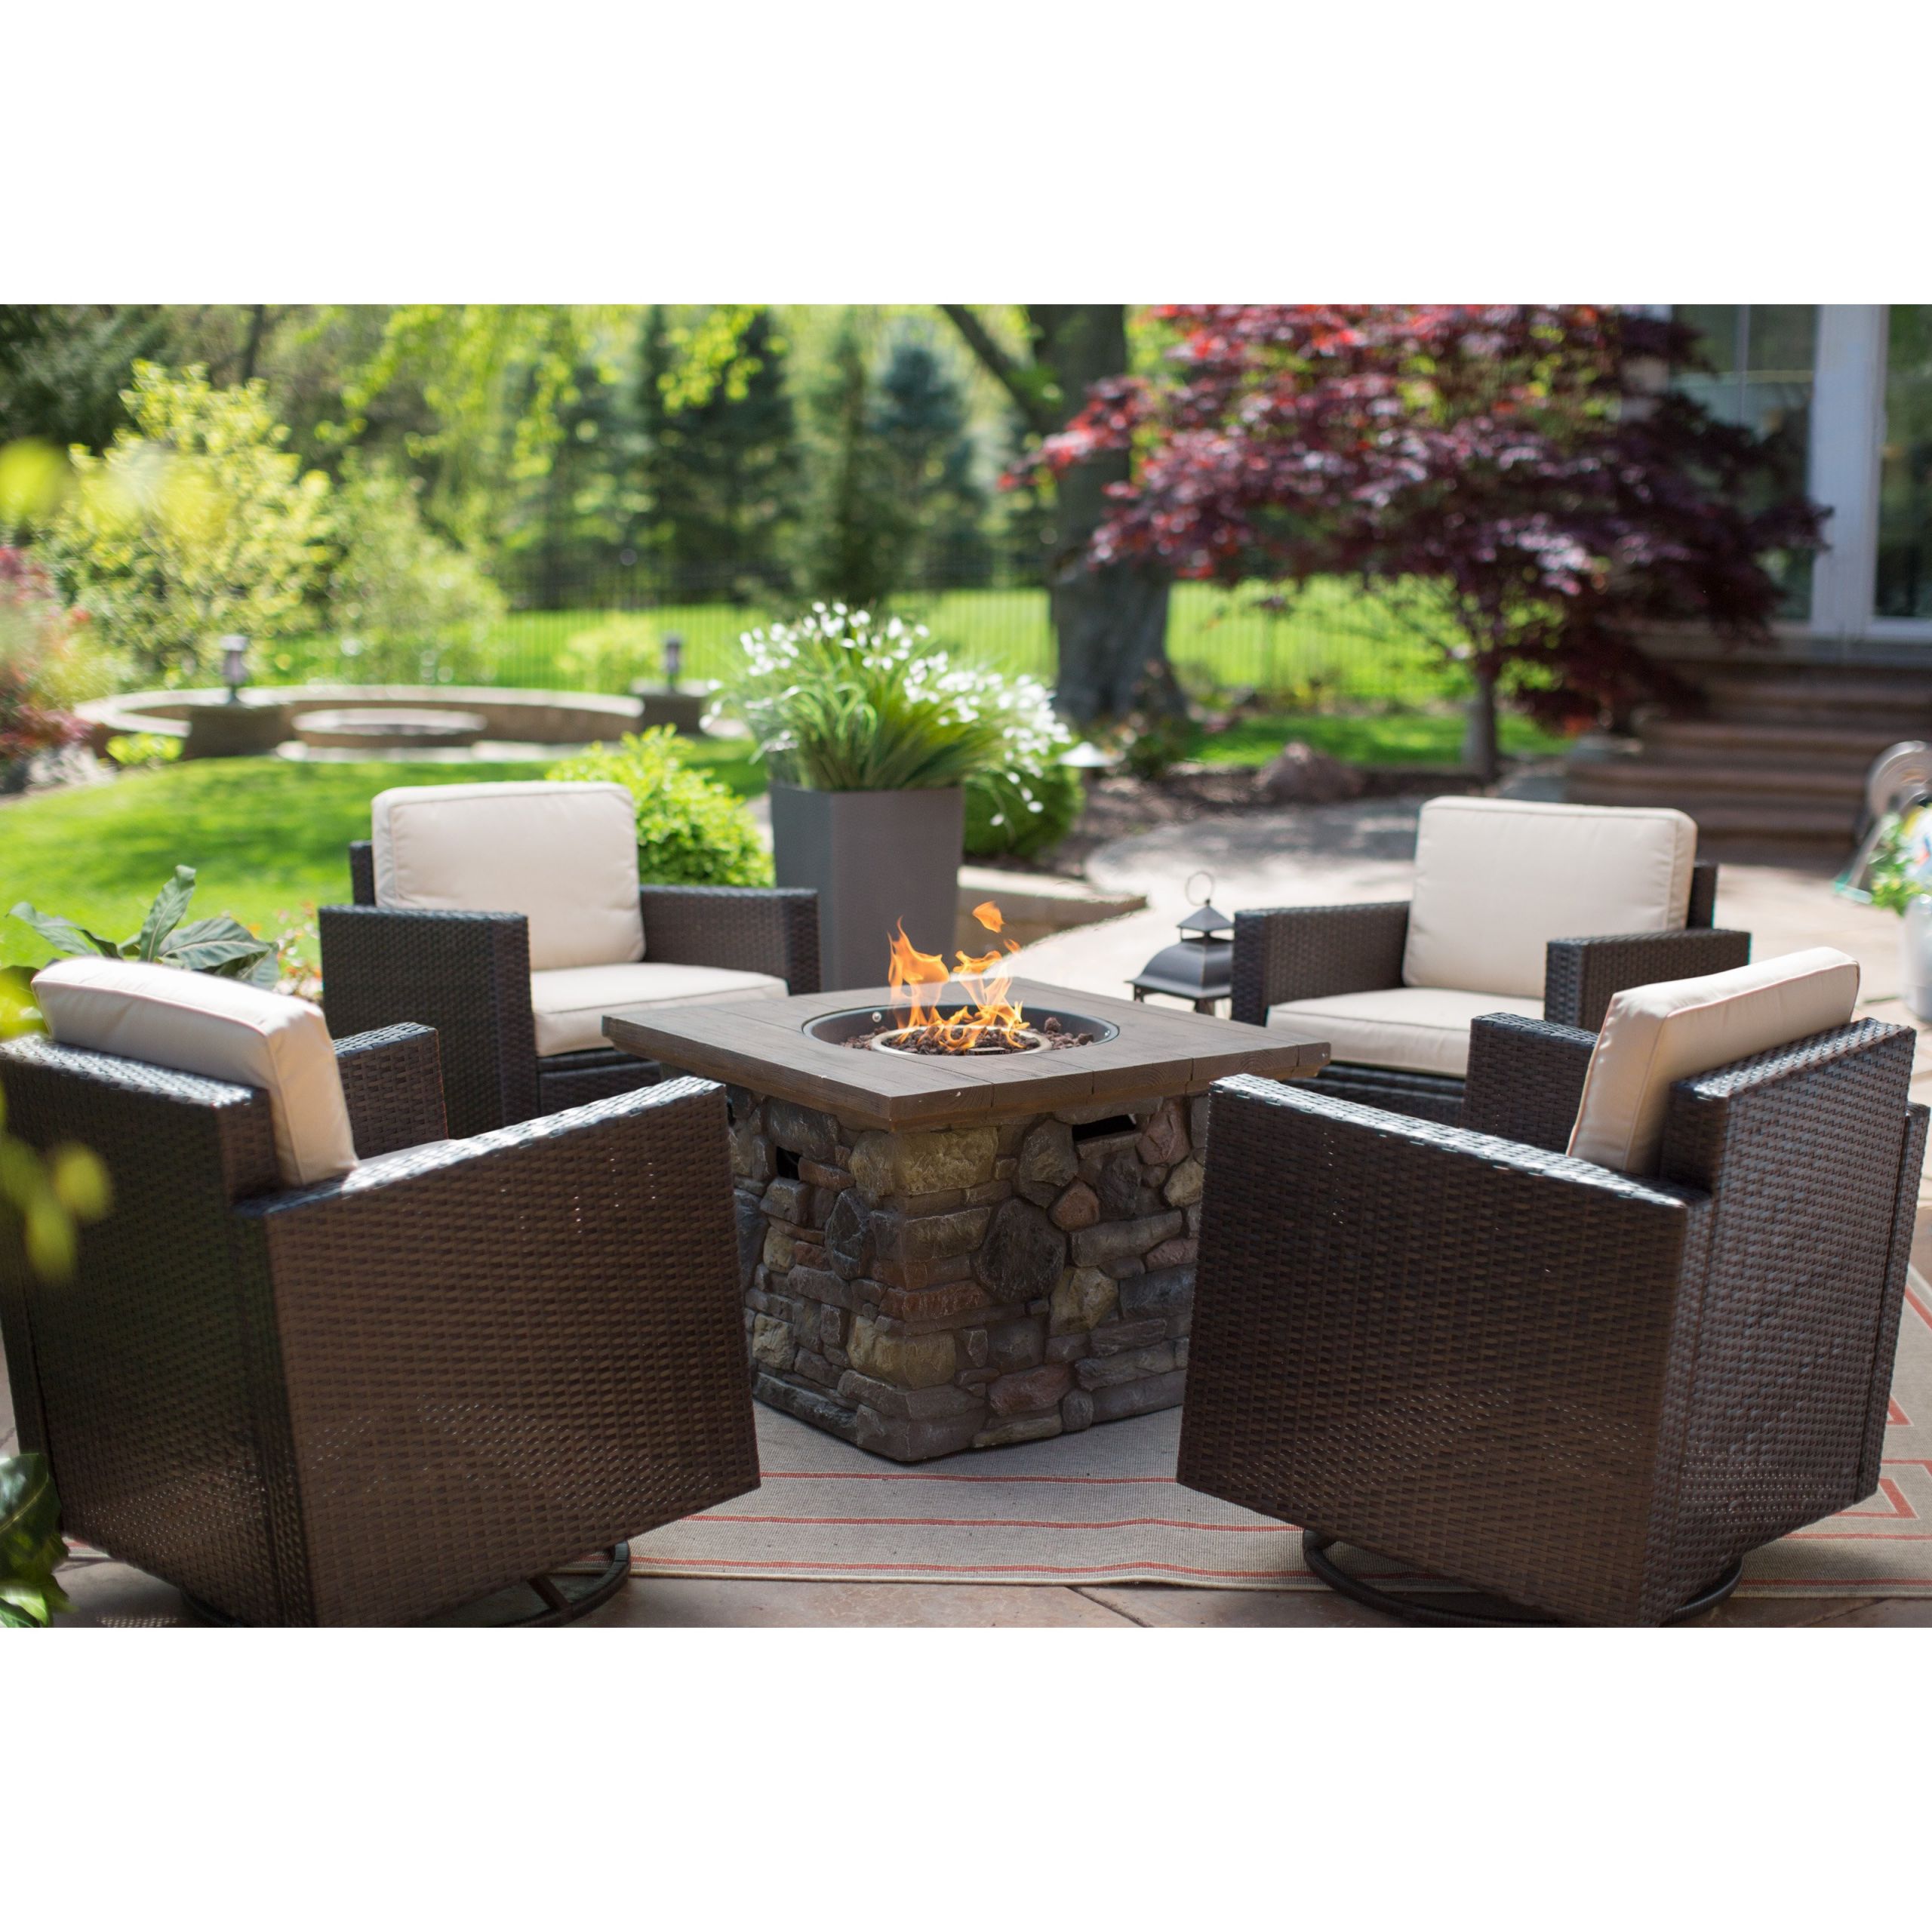 Patio Sets With Fire Pit
 Coral Coast Berea Wicker Red Ember Sheridan Fire Pit Chat